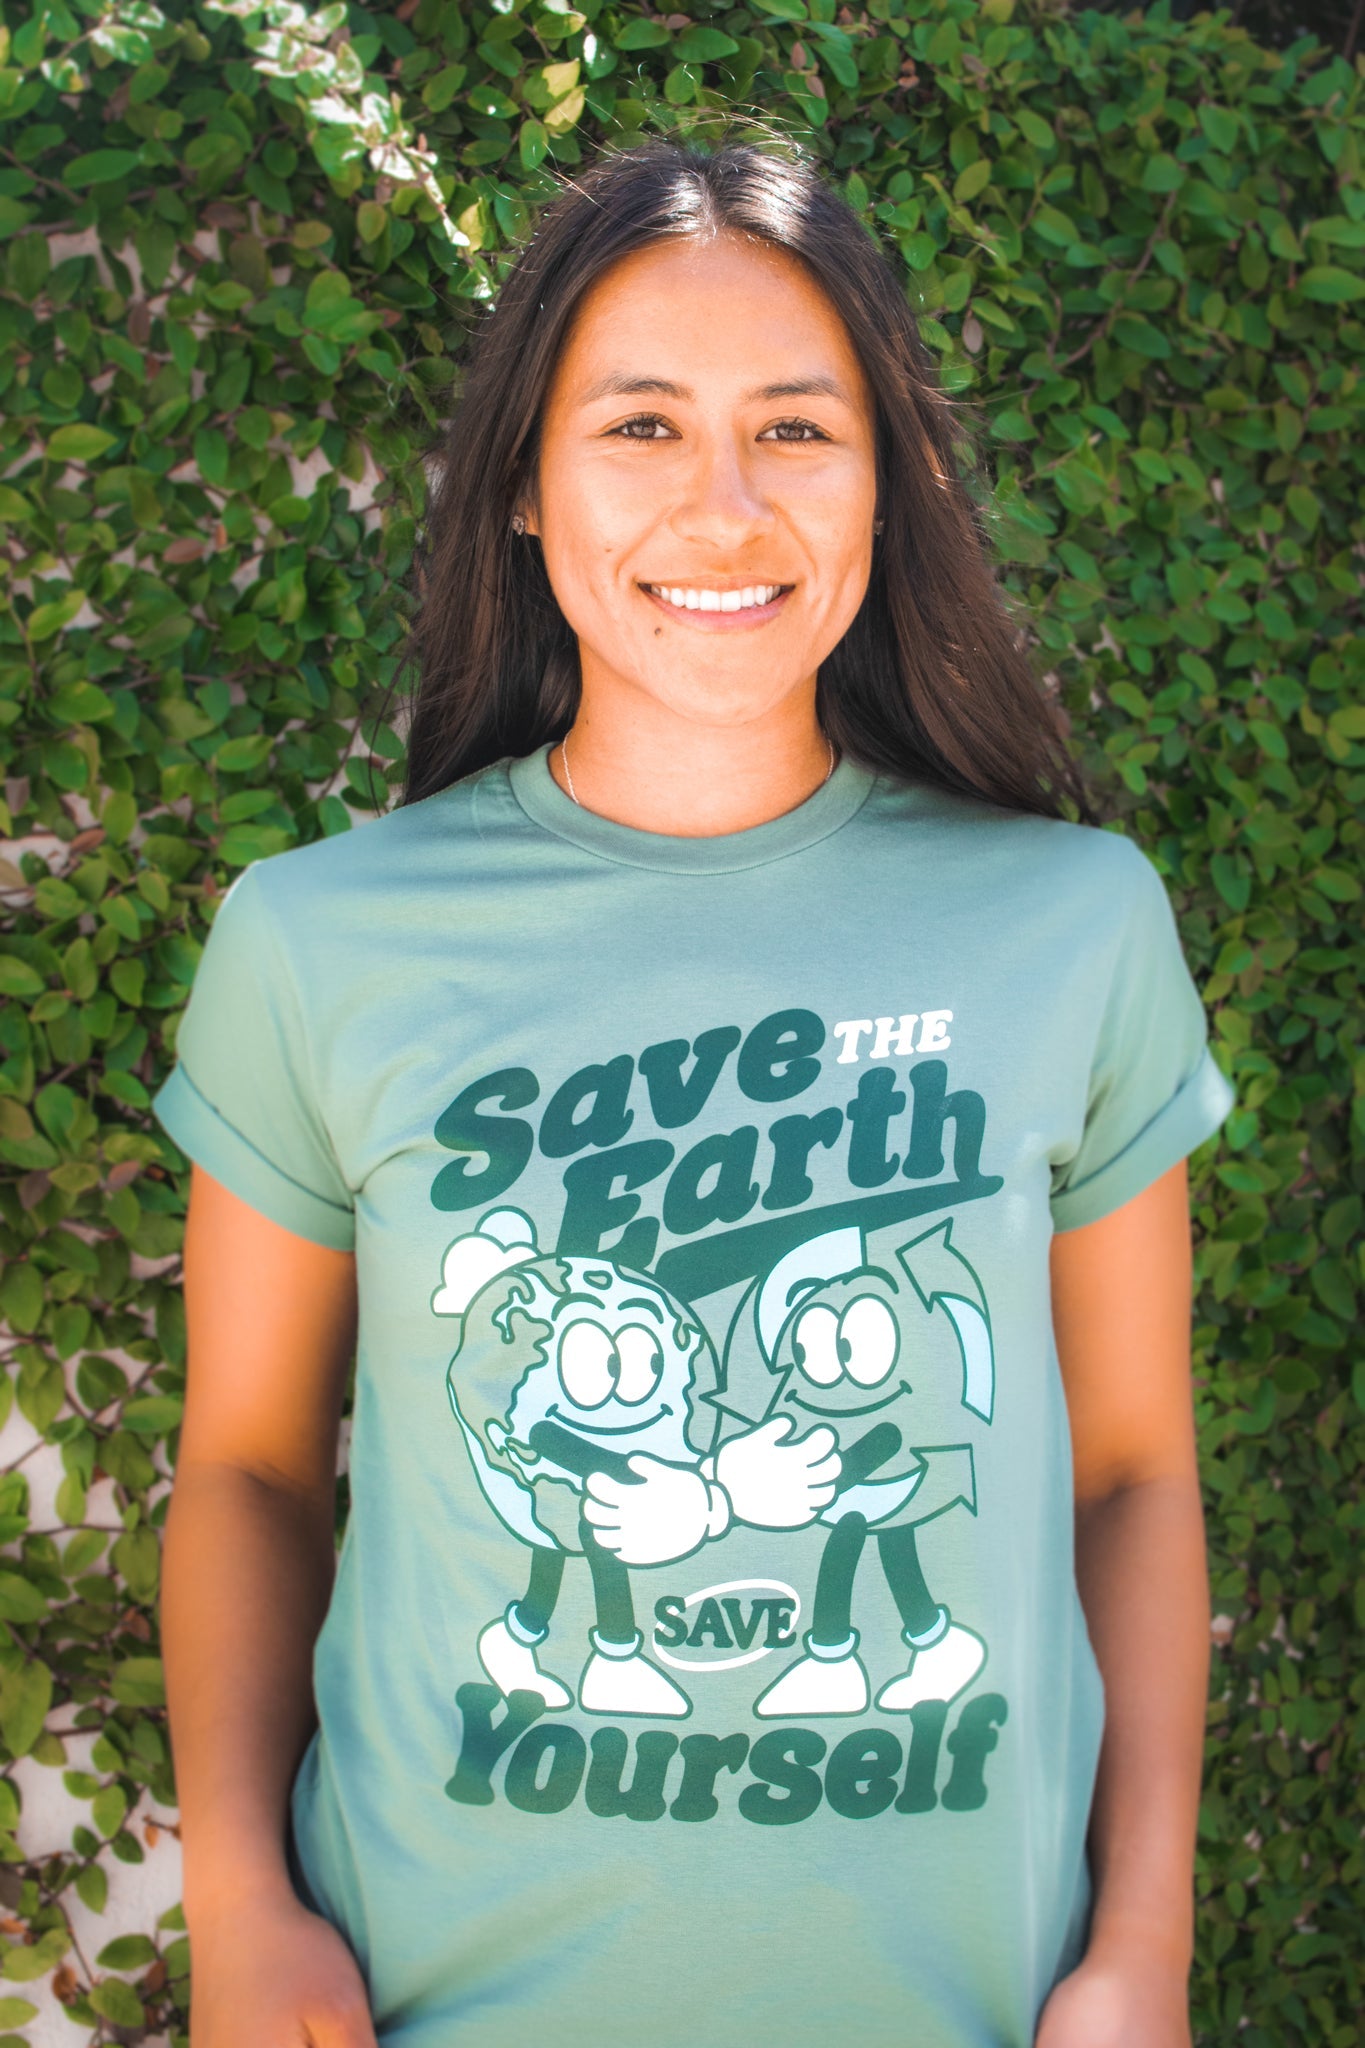 Save The Earth, Save Yourself - LACO Gives